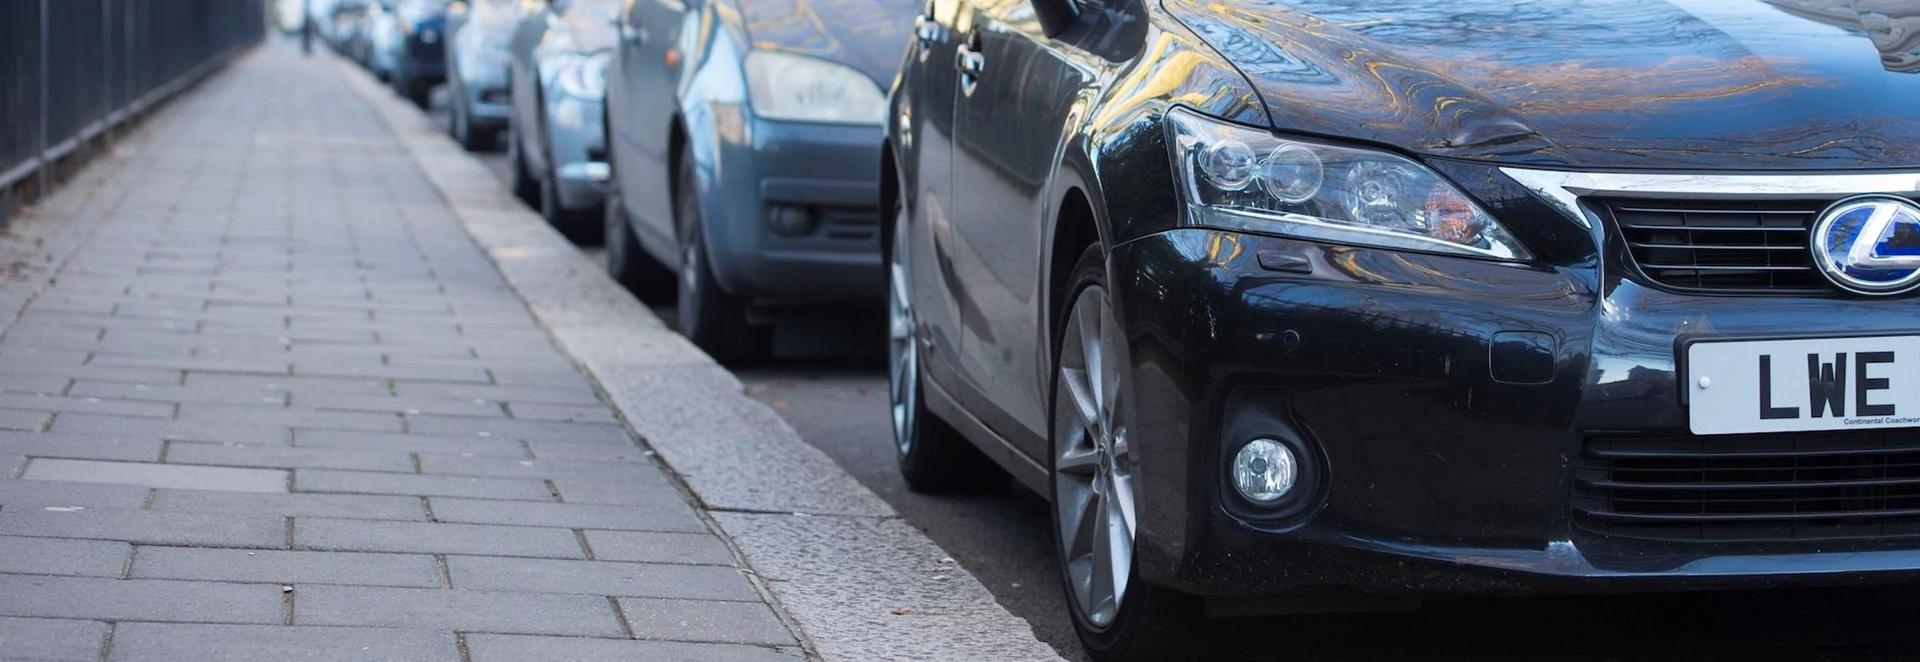 Pavement parking could soon be illegal across the UK and here’s why